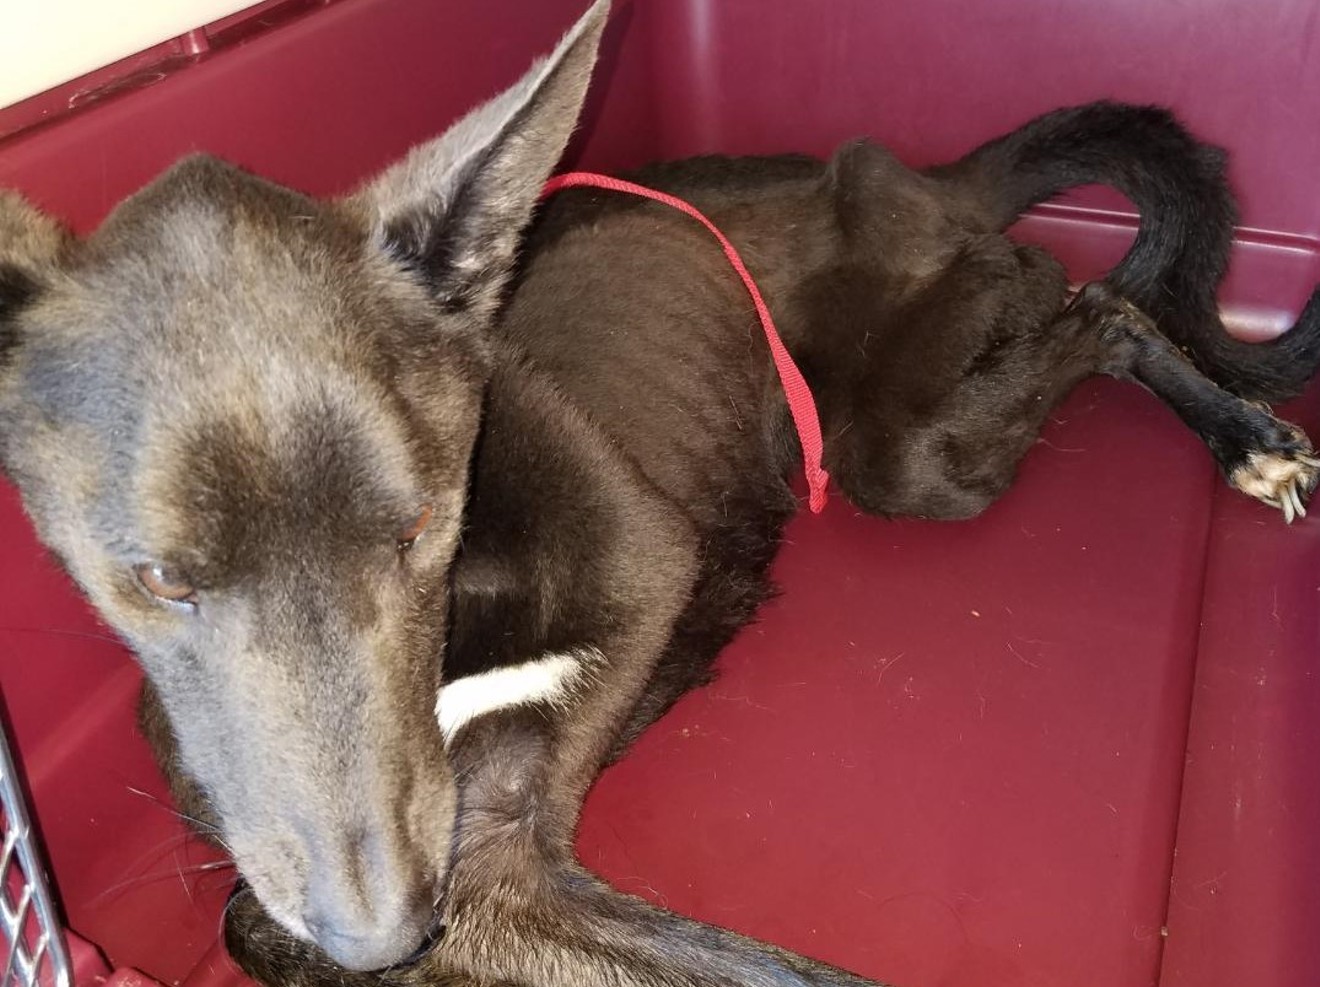 MCSO says this dog, one of the 52 seized from Shelter Paws in 2018, died soon after it was rescued by deputies.